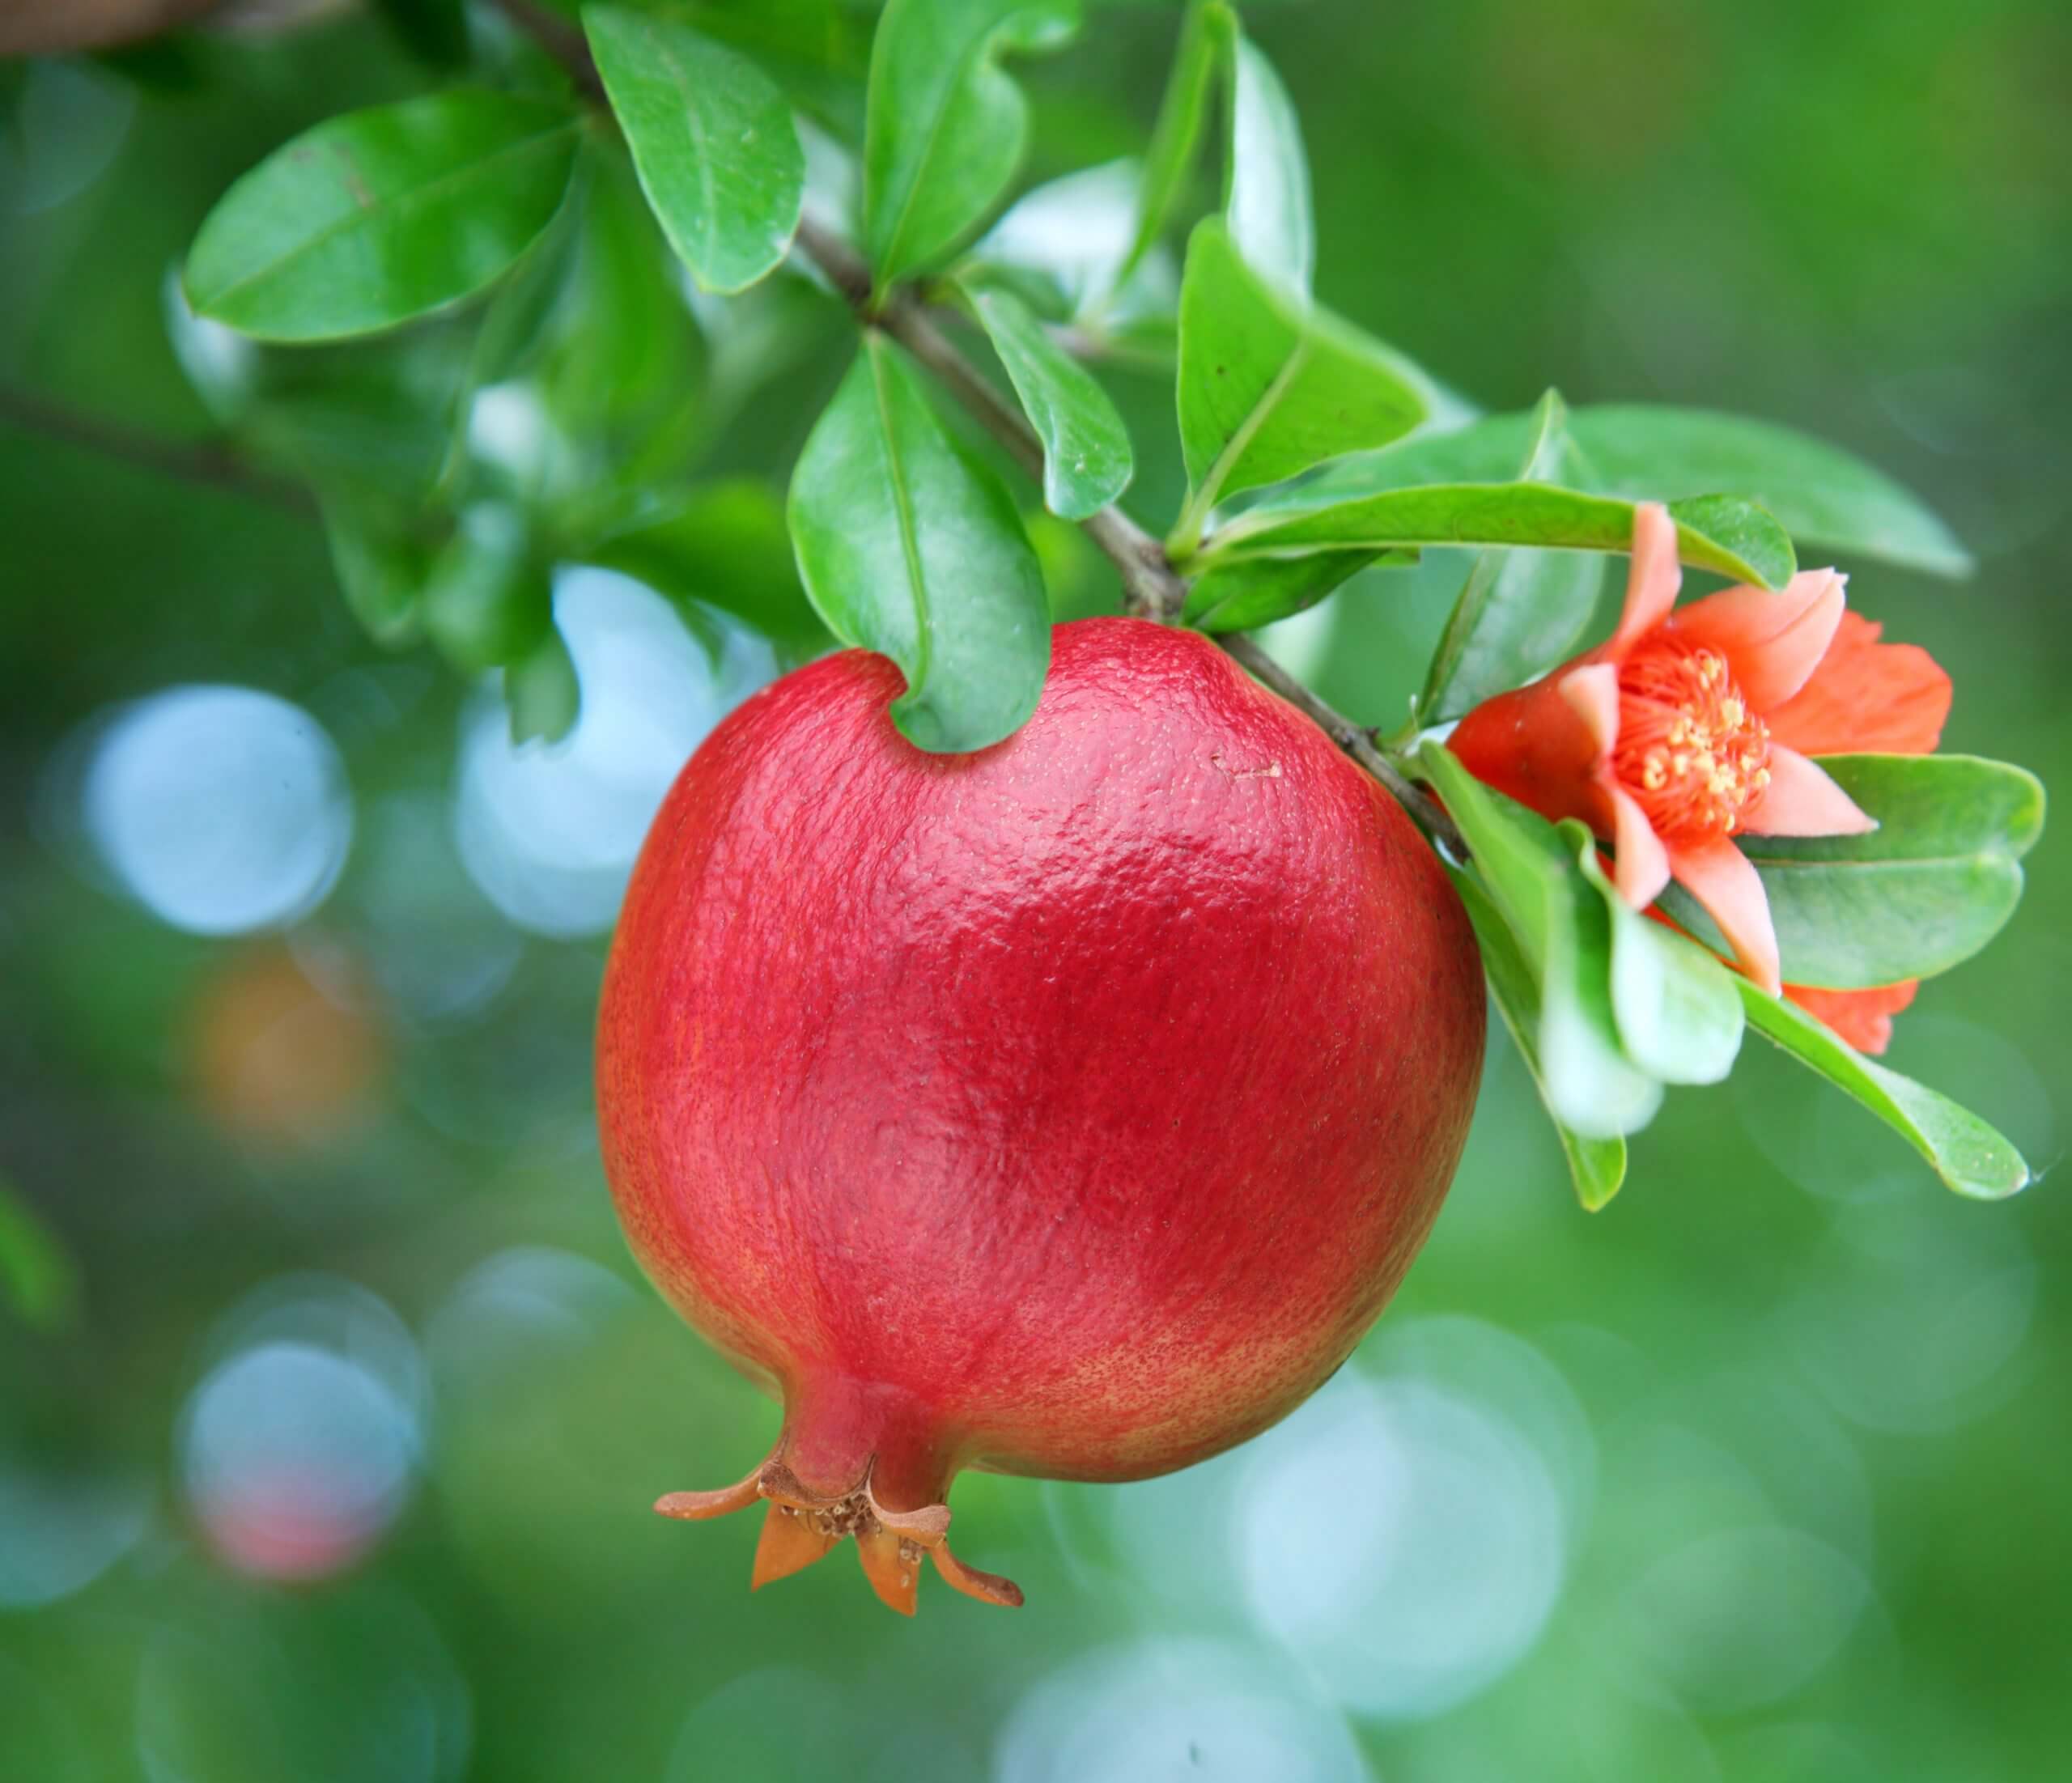 Ripe pomegranate on the branch. The foliage on the background.